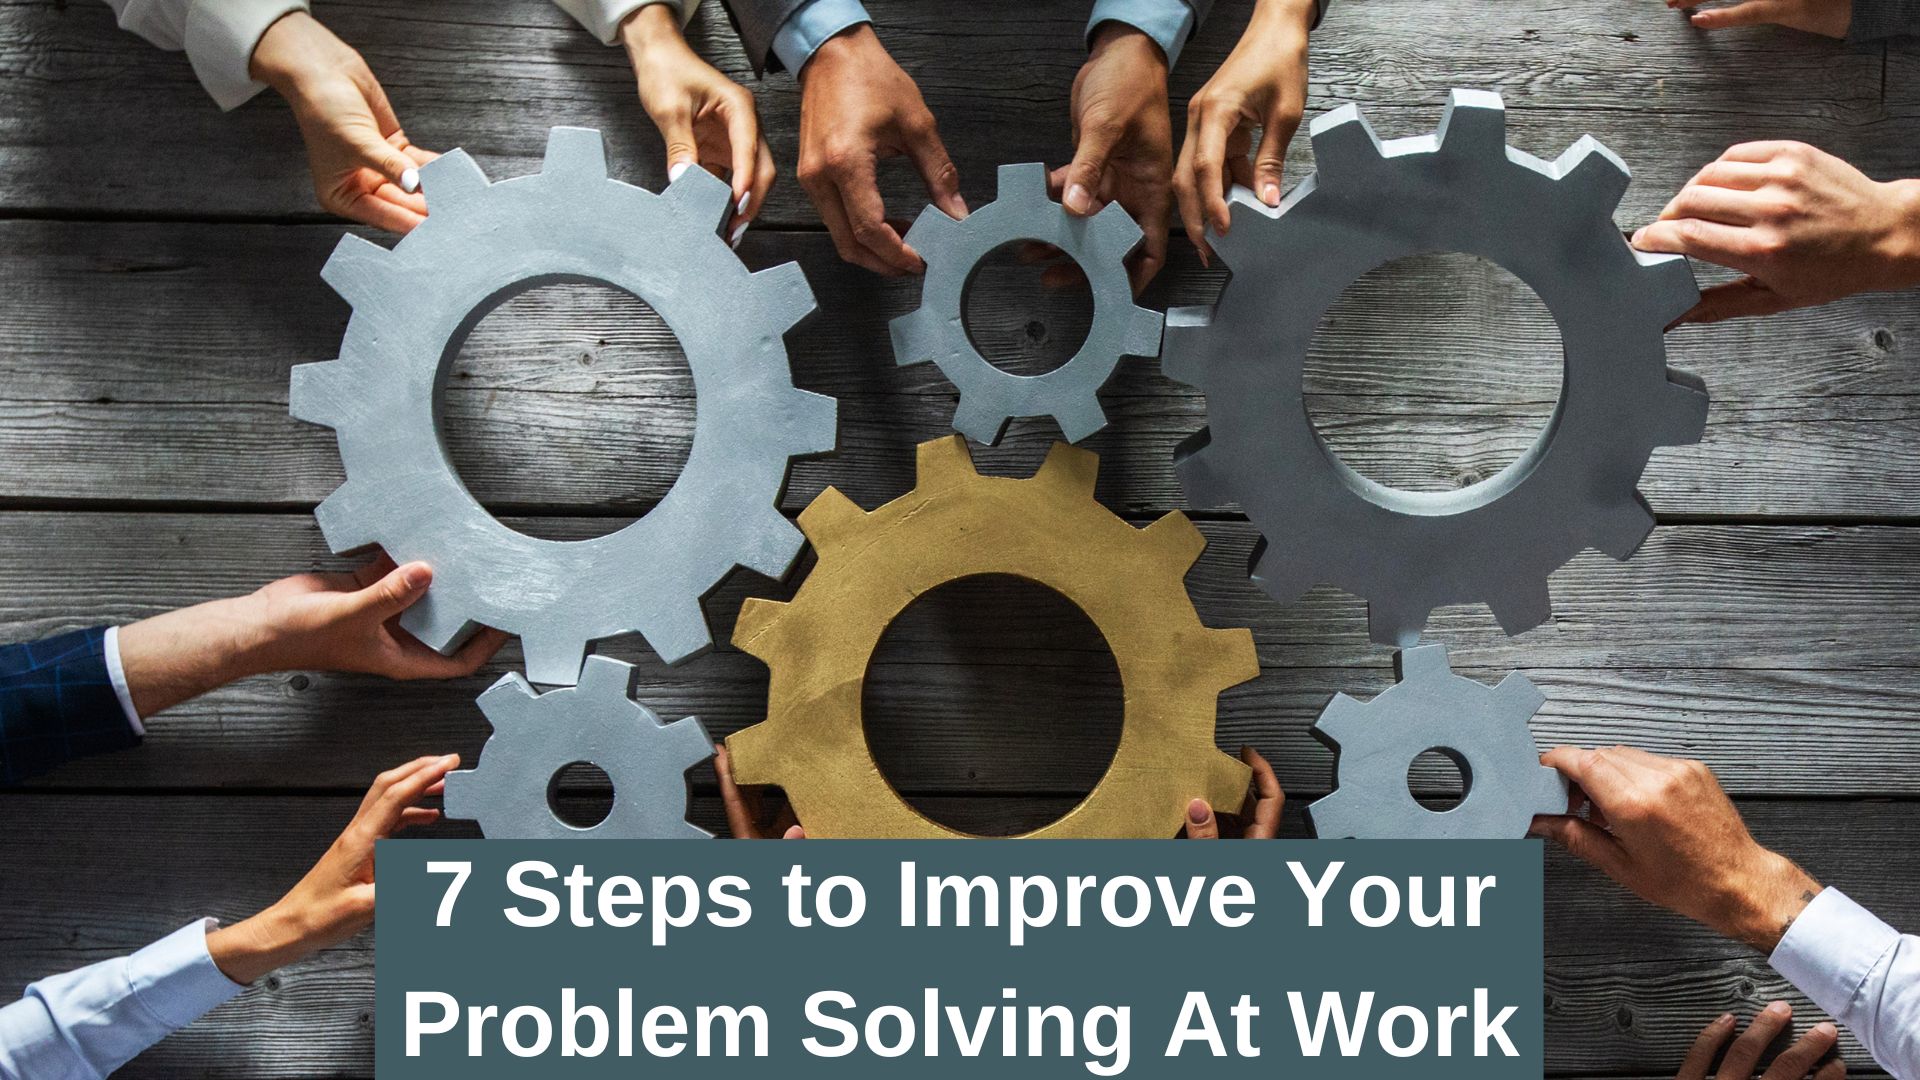 7 Steps to Improve Your Problem Solving Skills at work